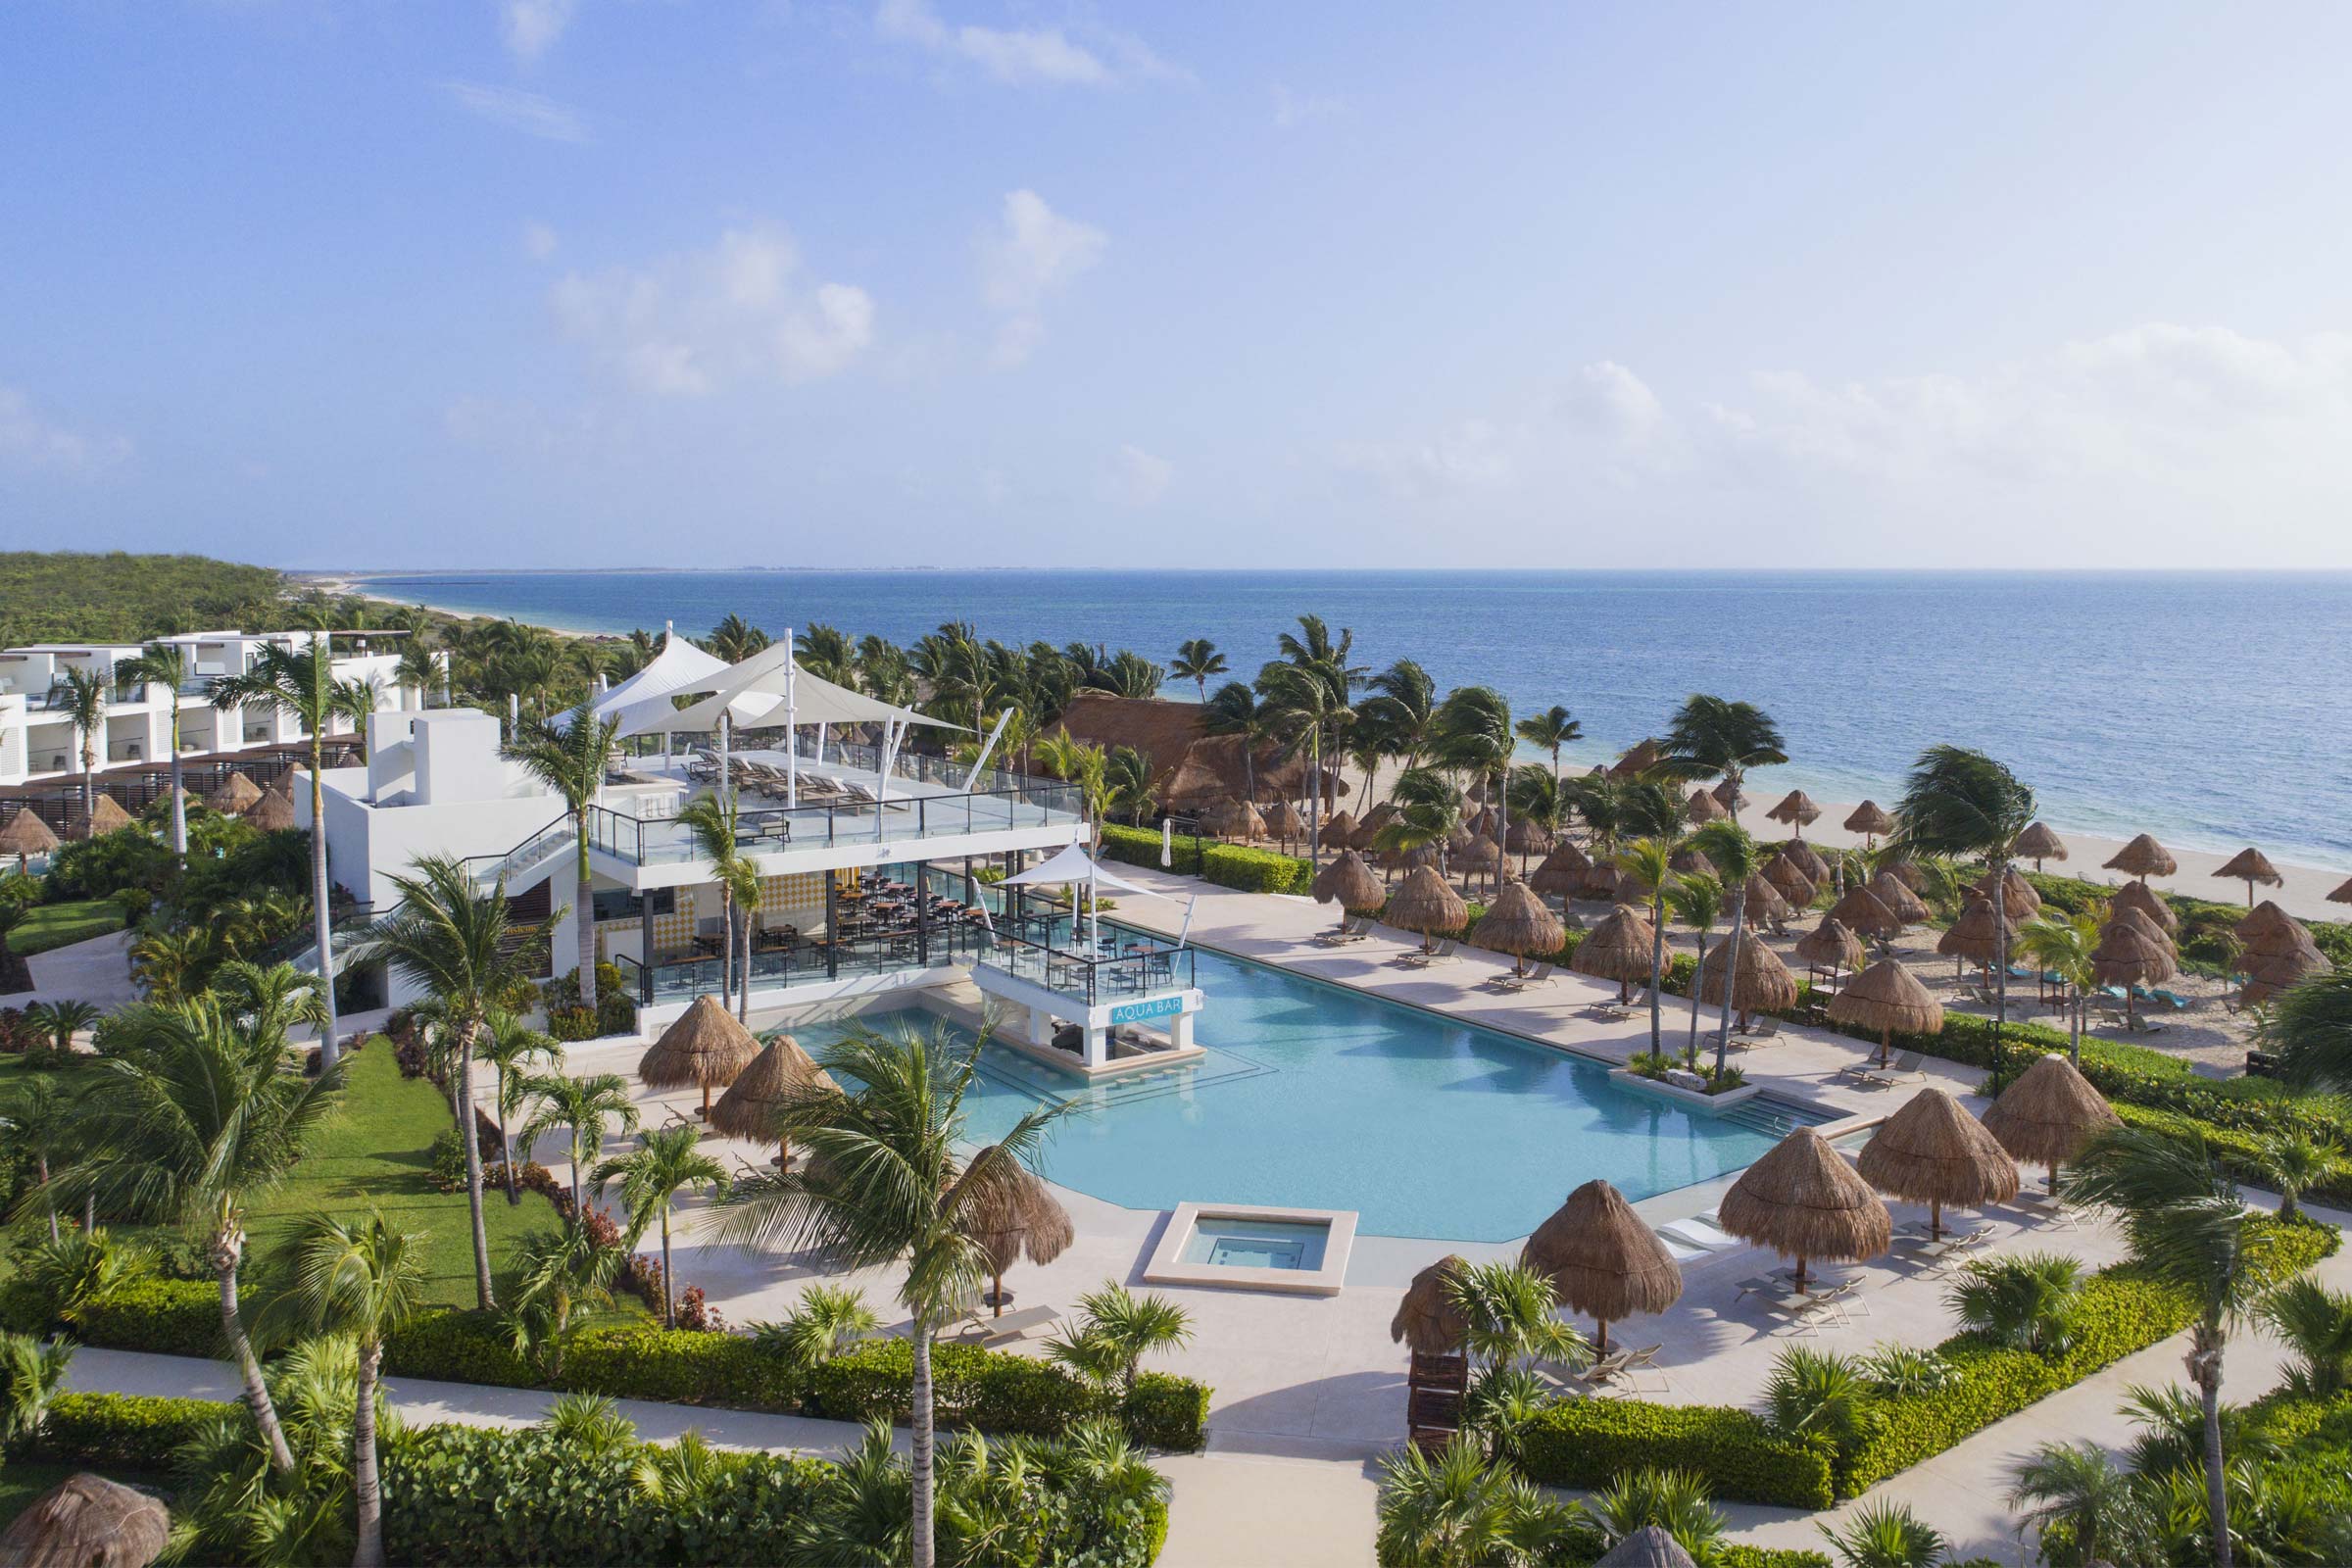 Finest Playa Mujeres all ages resort in Mexico